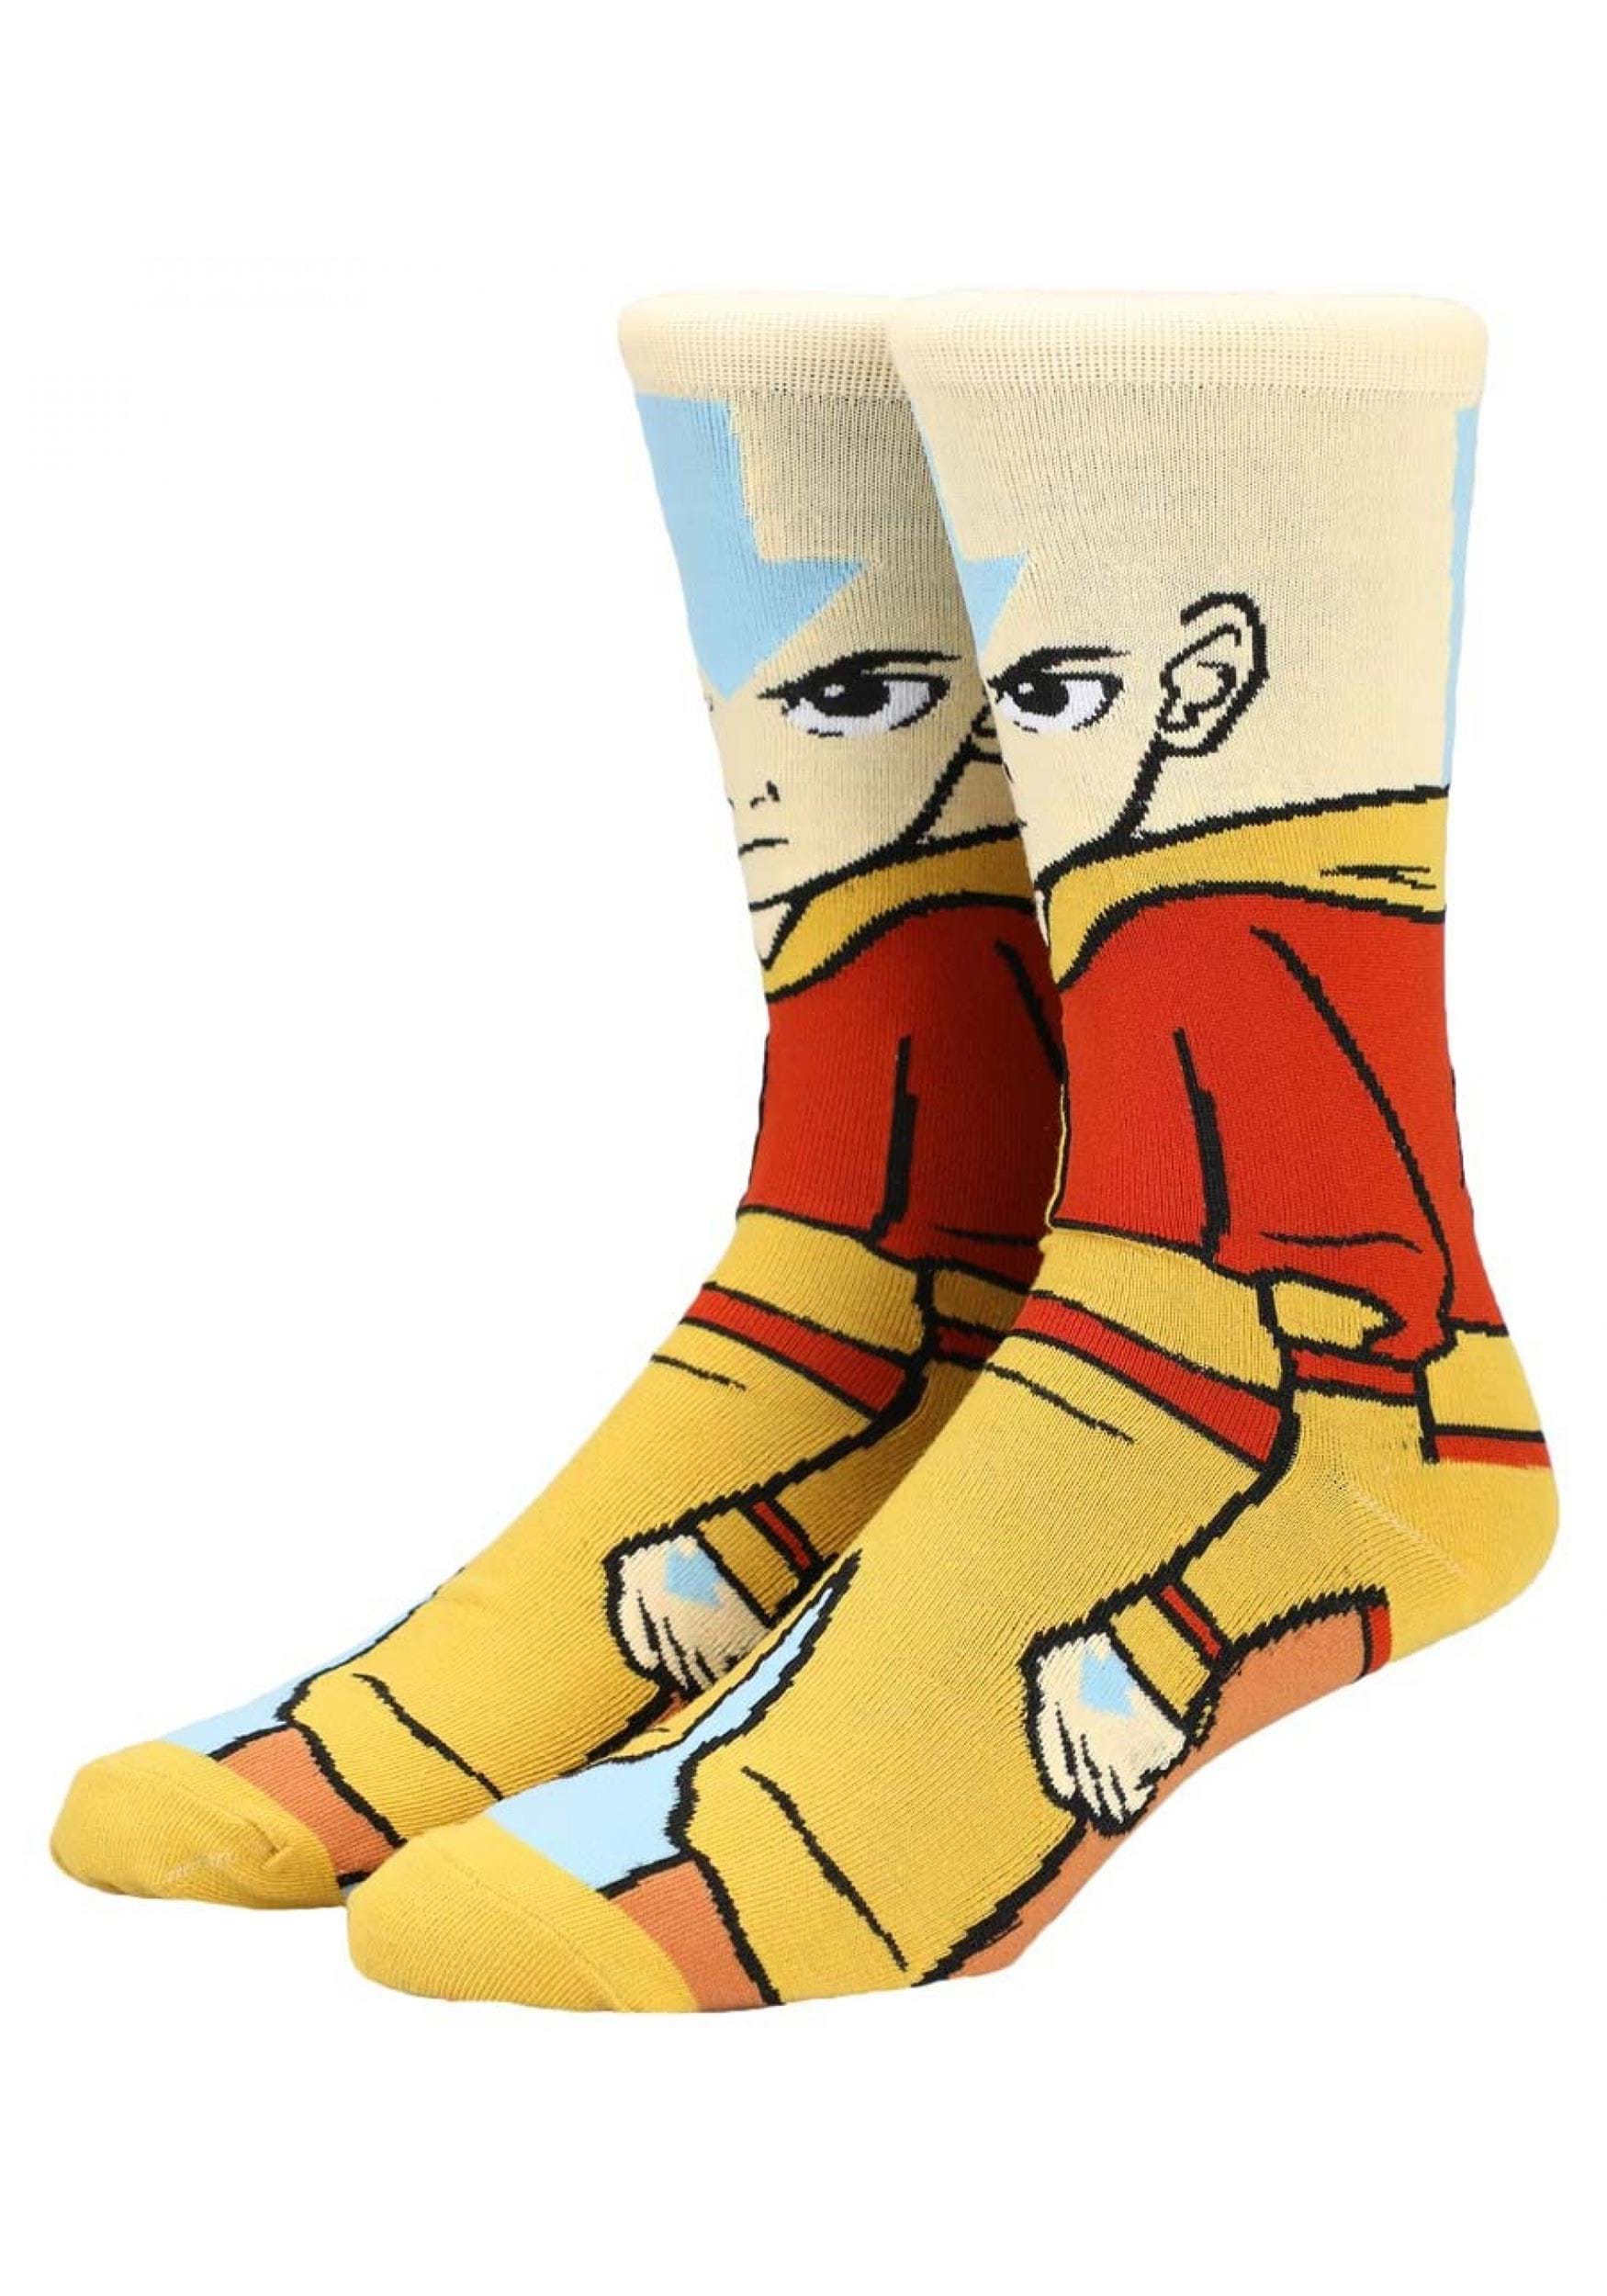 Aang 360 Character Socks from Avatar the Last Airbender